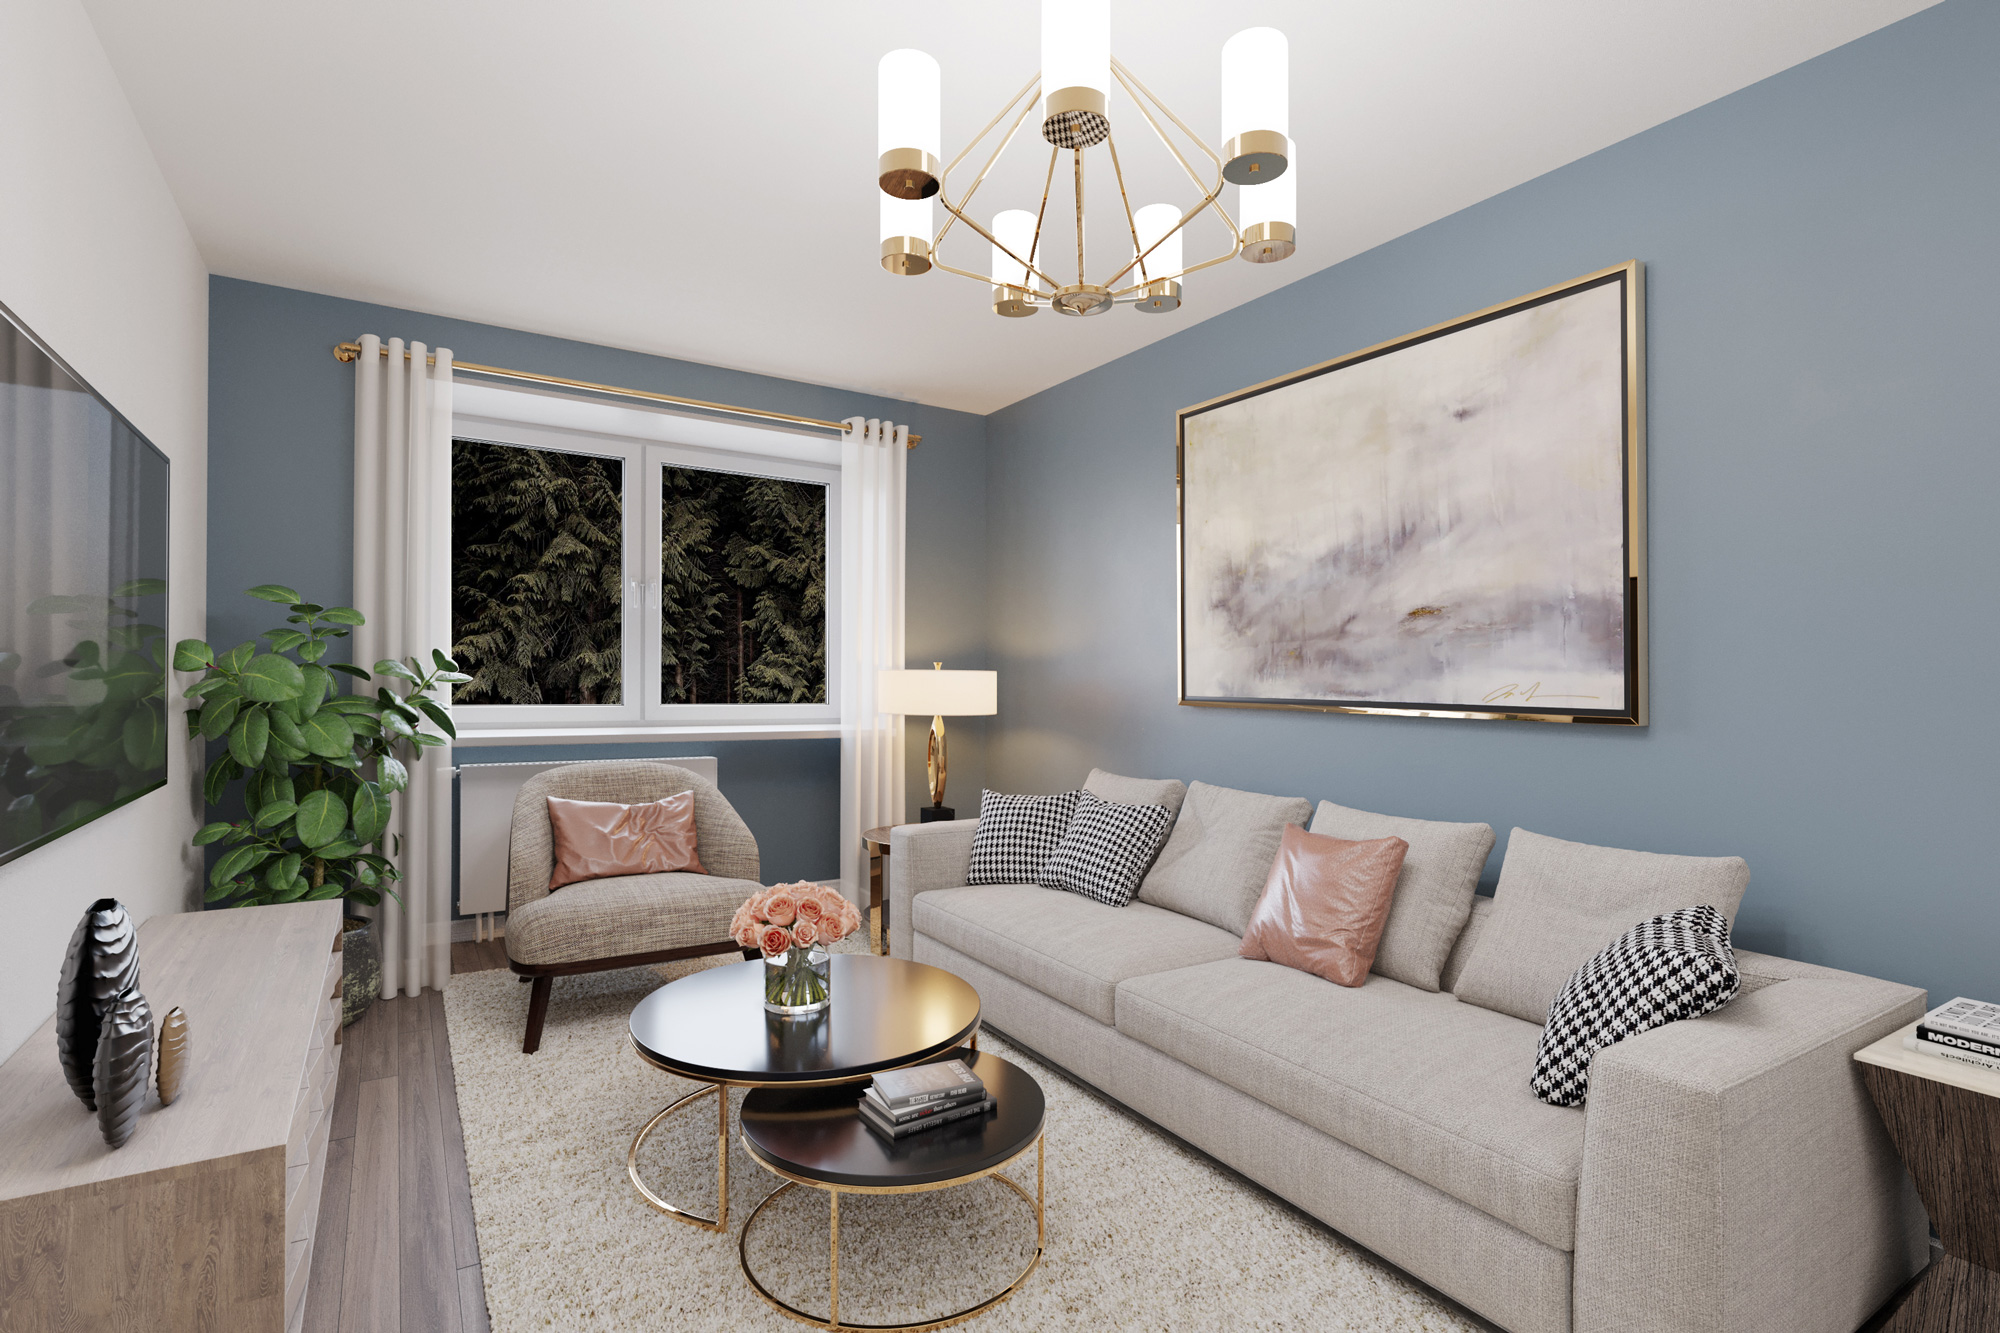 Interior of a living room transformed with powder blue walls